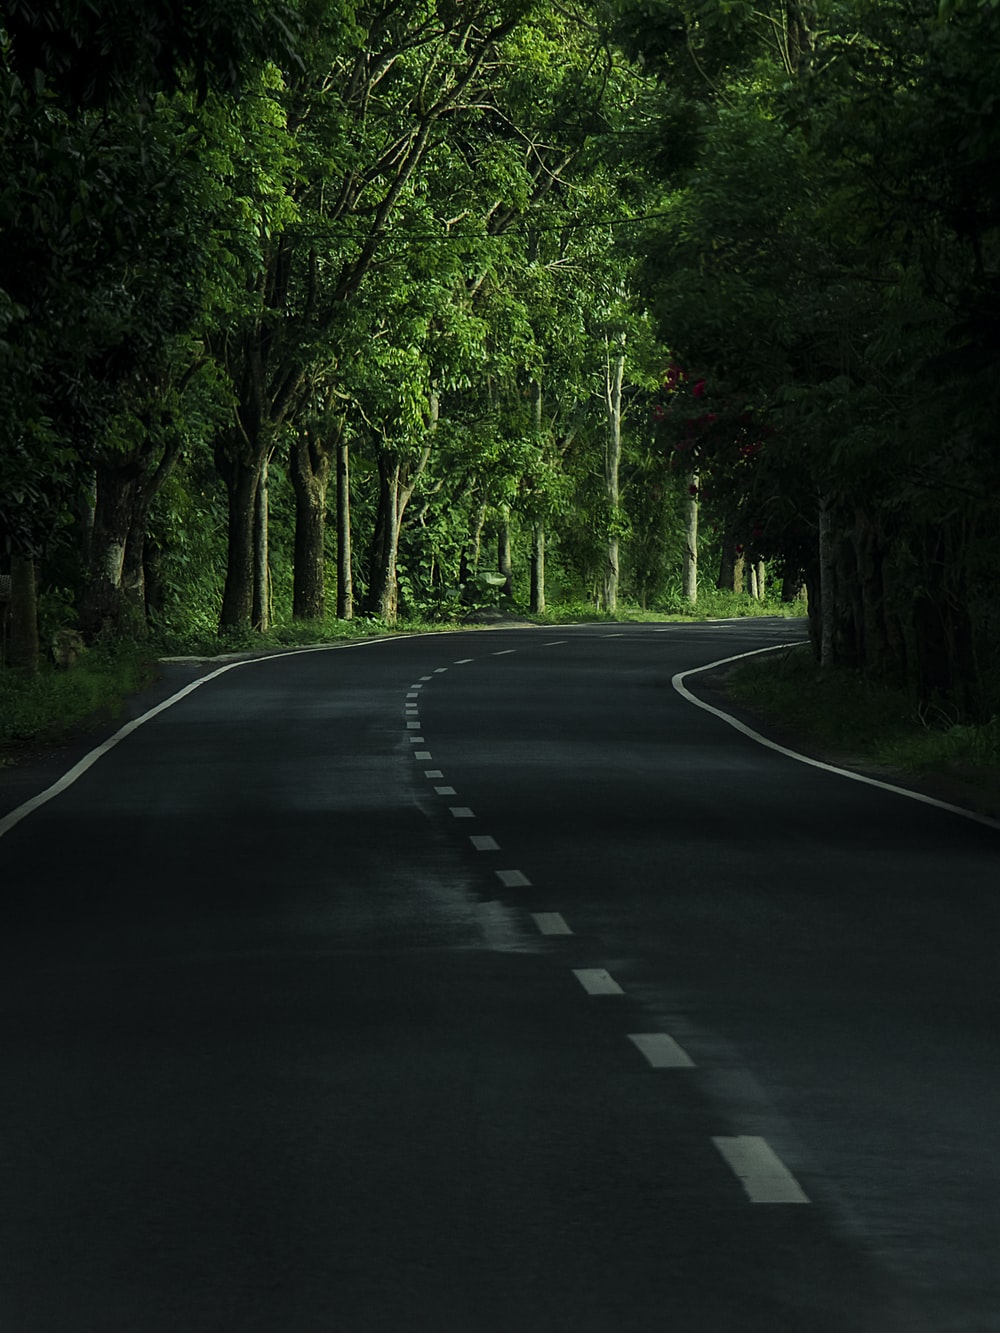 Road Wallpaper Picture. Download Free Image